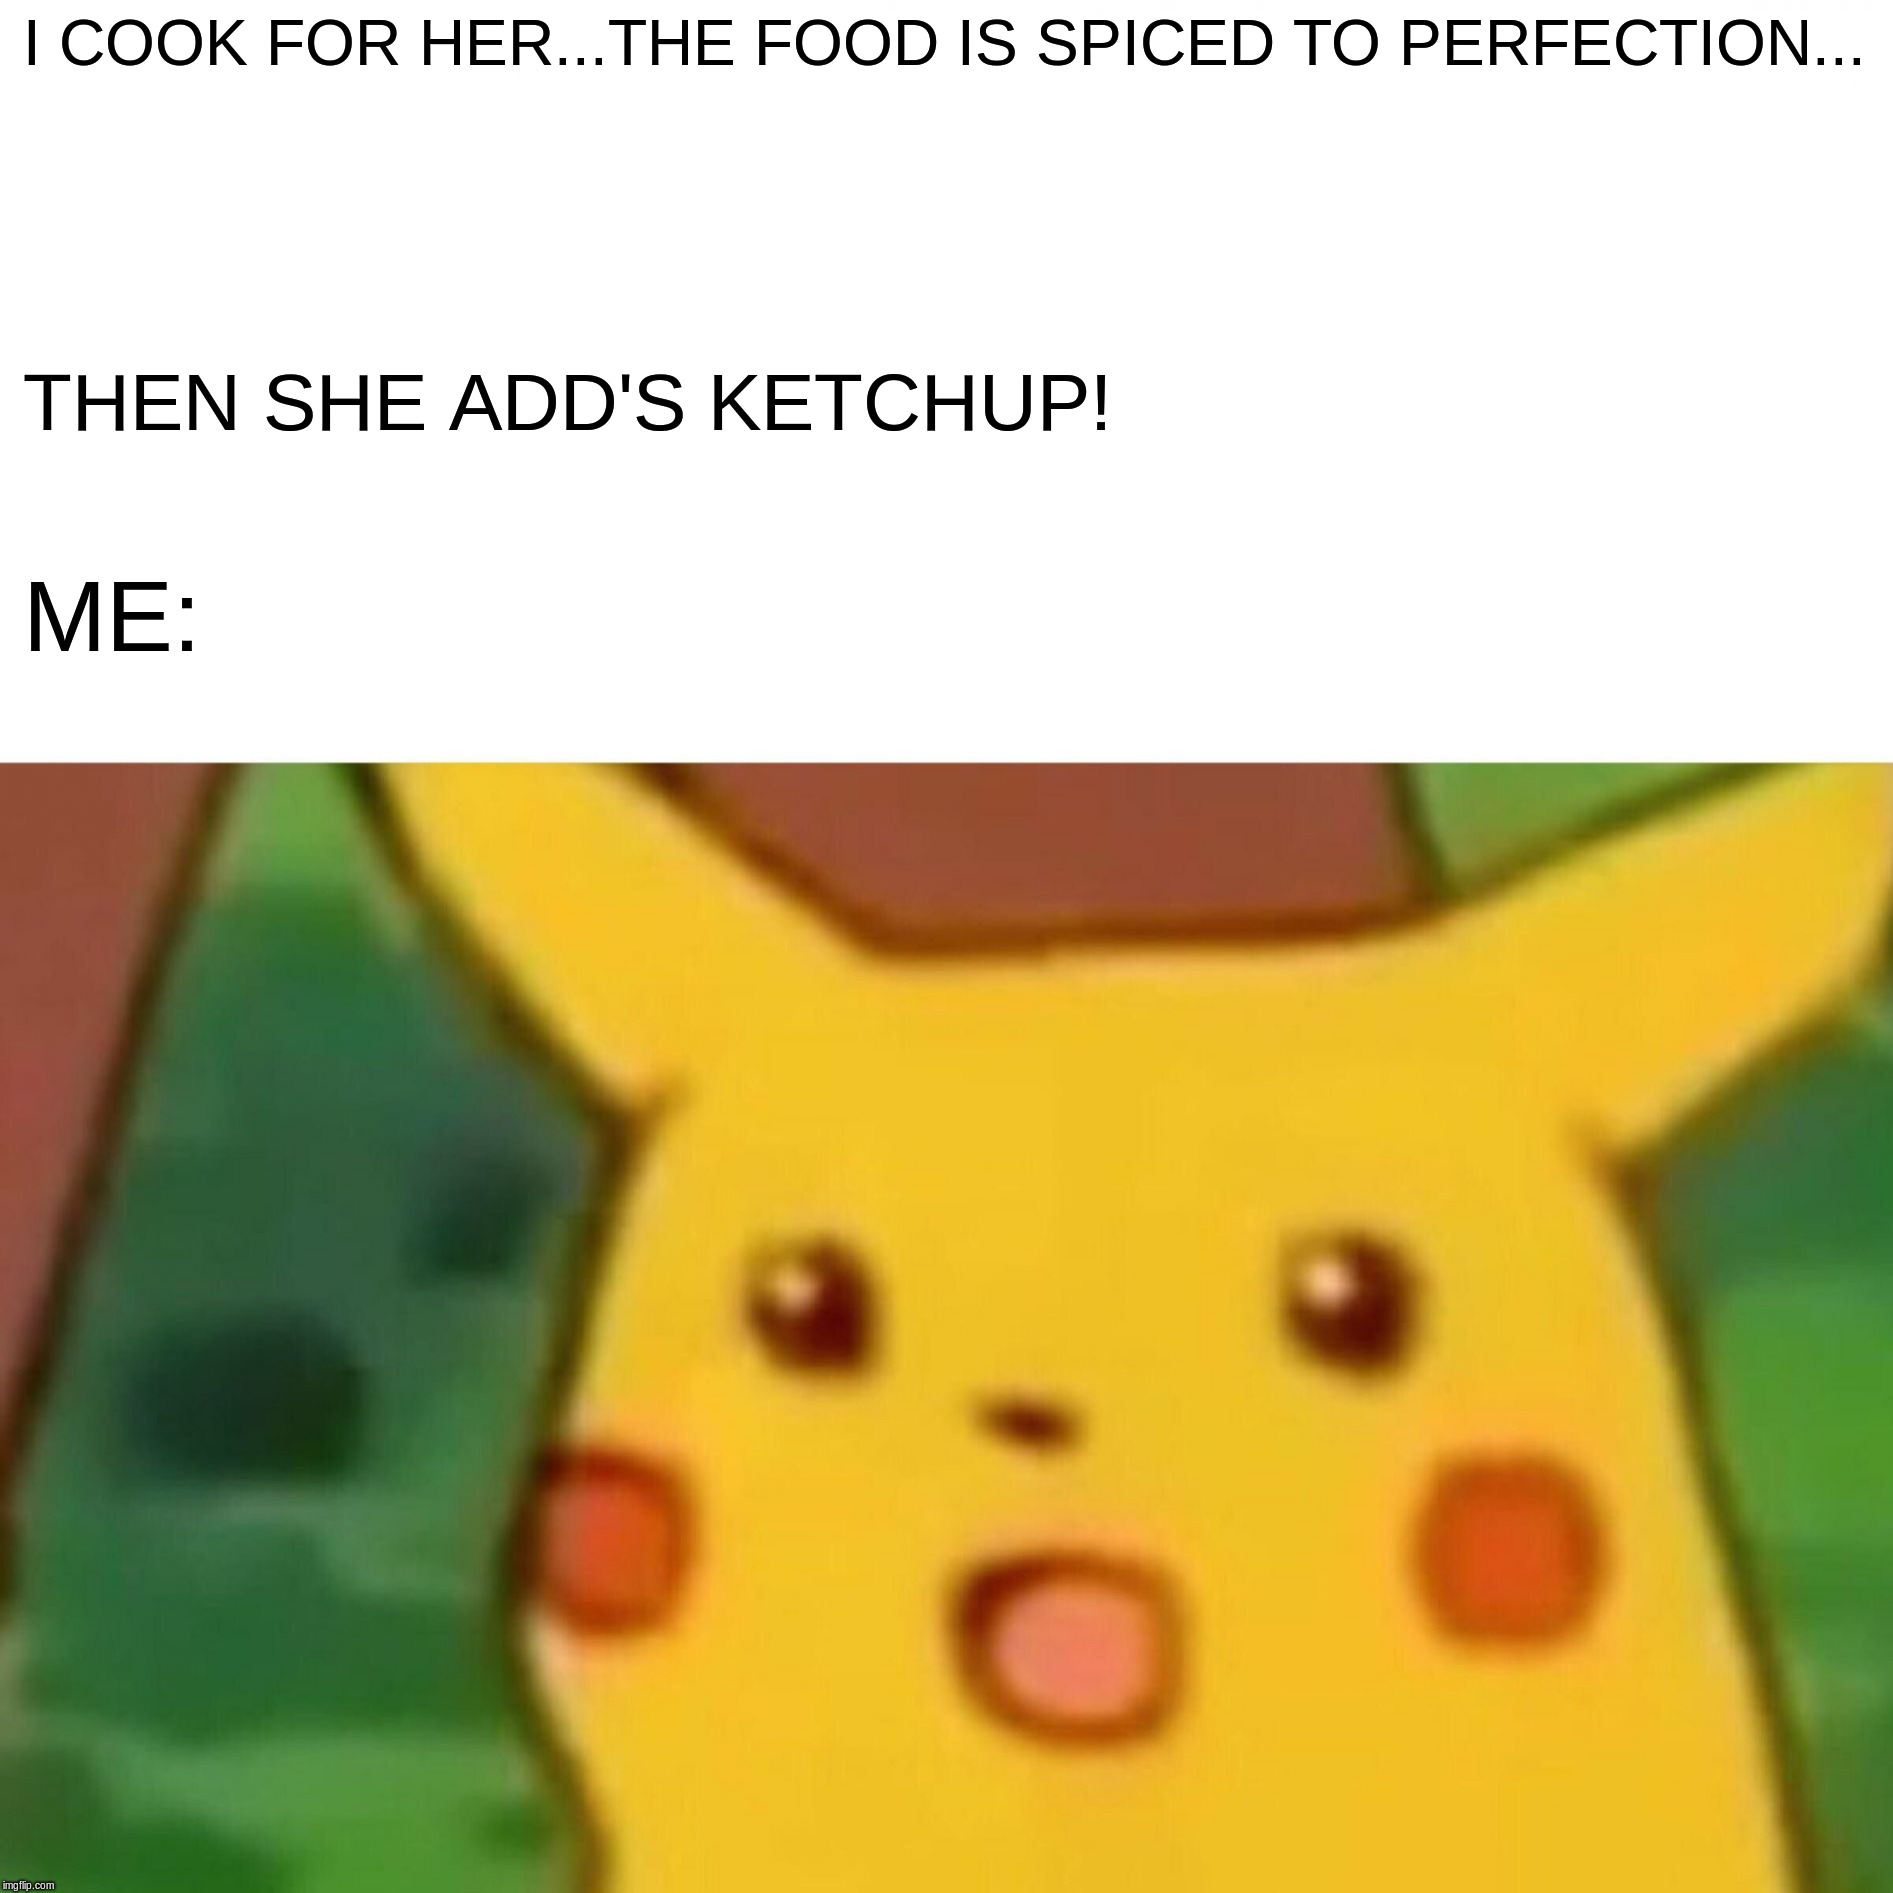 Surprised Pikachu Meme | I COOK FOR HER...THE FOOD IS SPICED TO PERFECTION... THEN SHE ADD'S KETCHUP! ME: | image tagged in memes,surprised pikachu,spice,food,wife,girlfriend | made w/ Imgflip meme maker